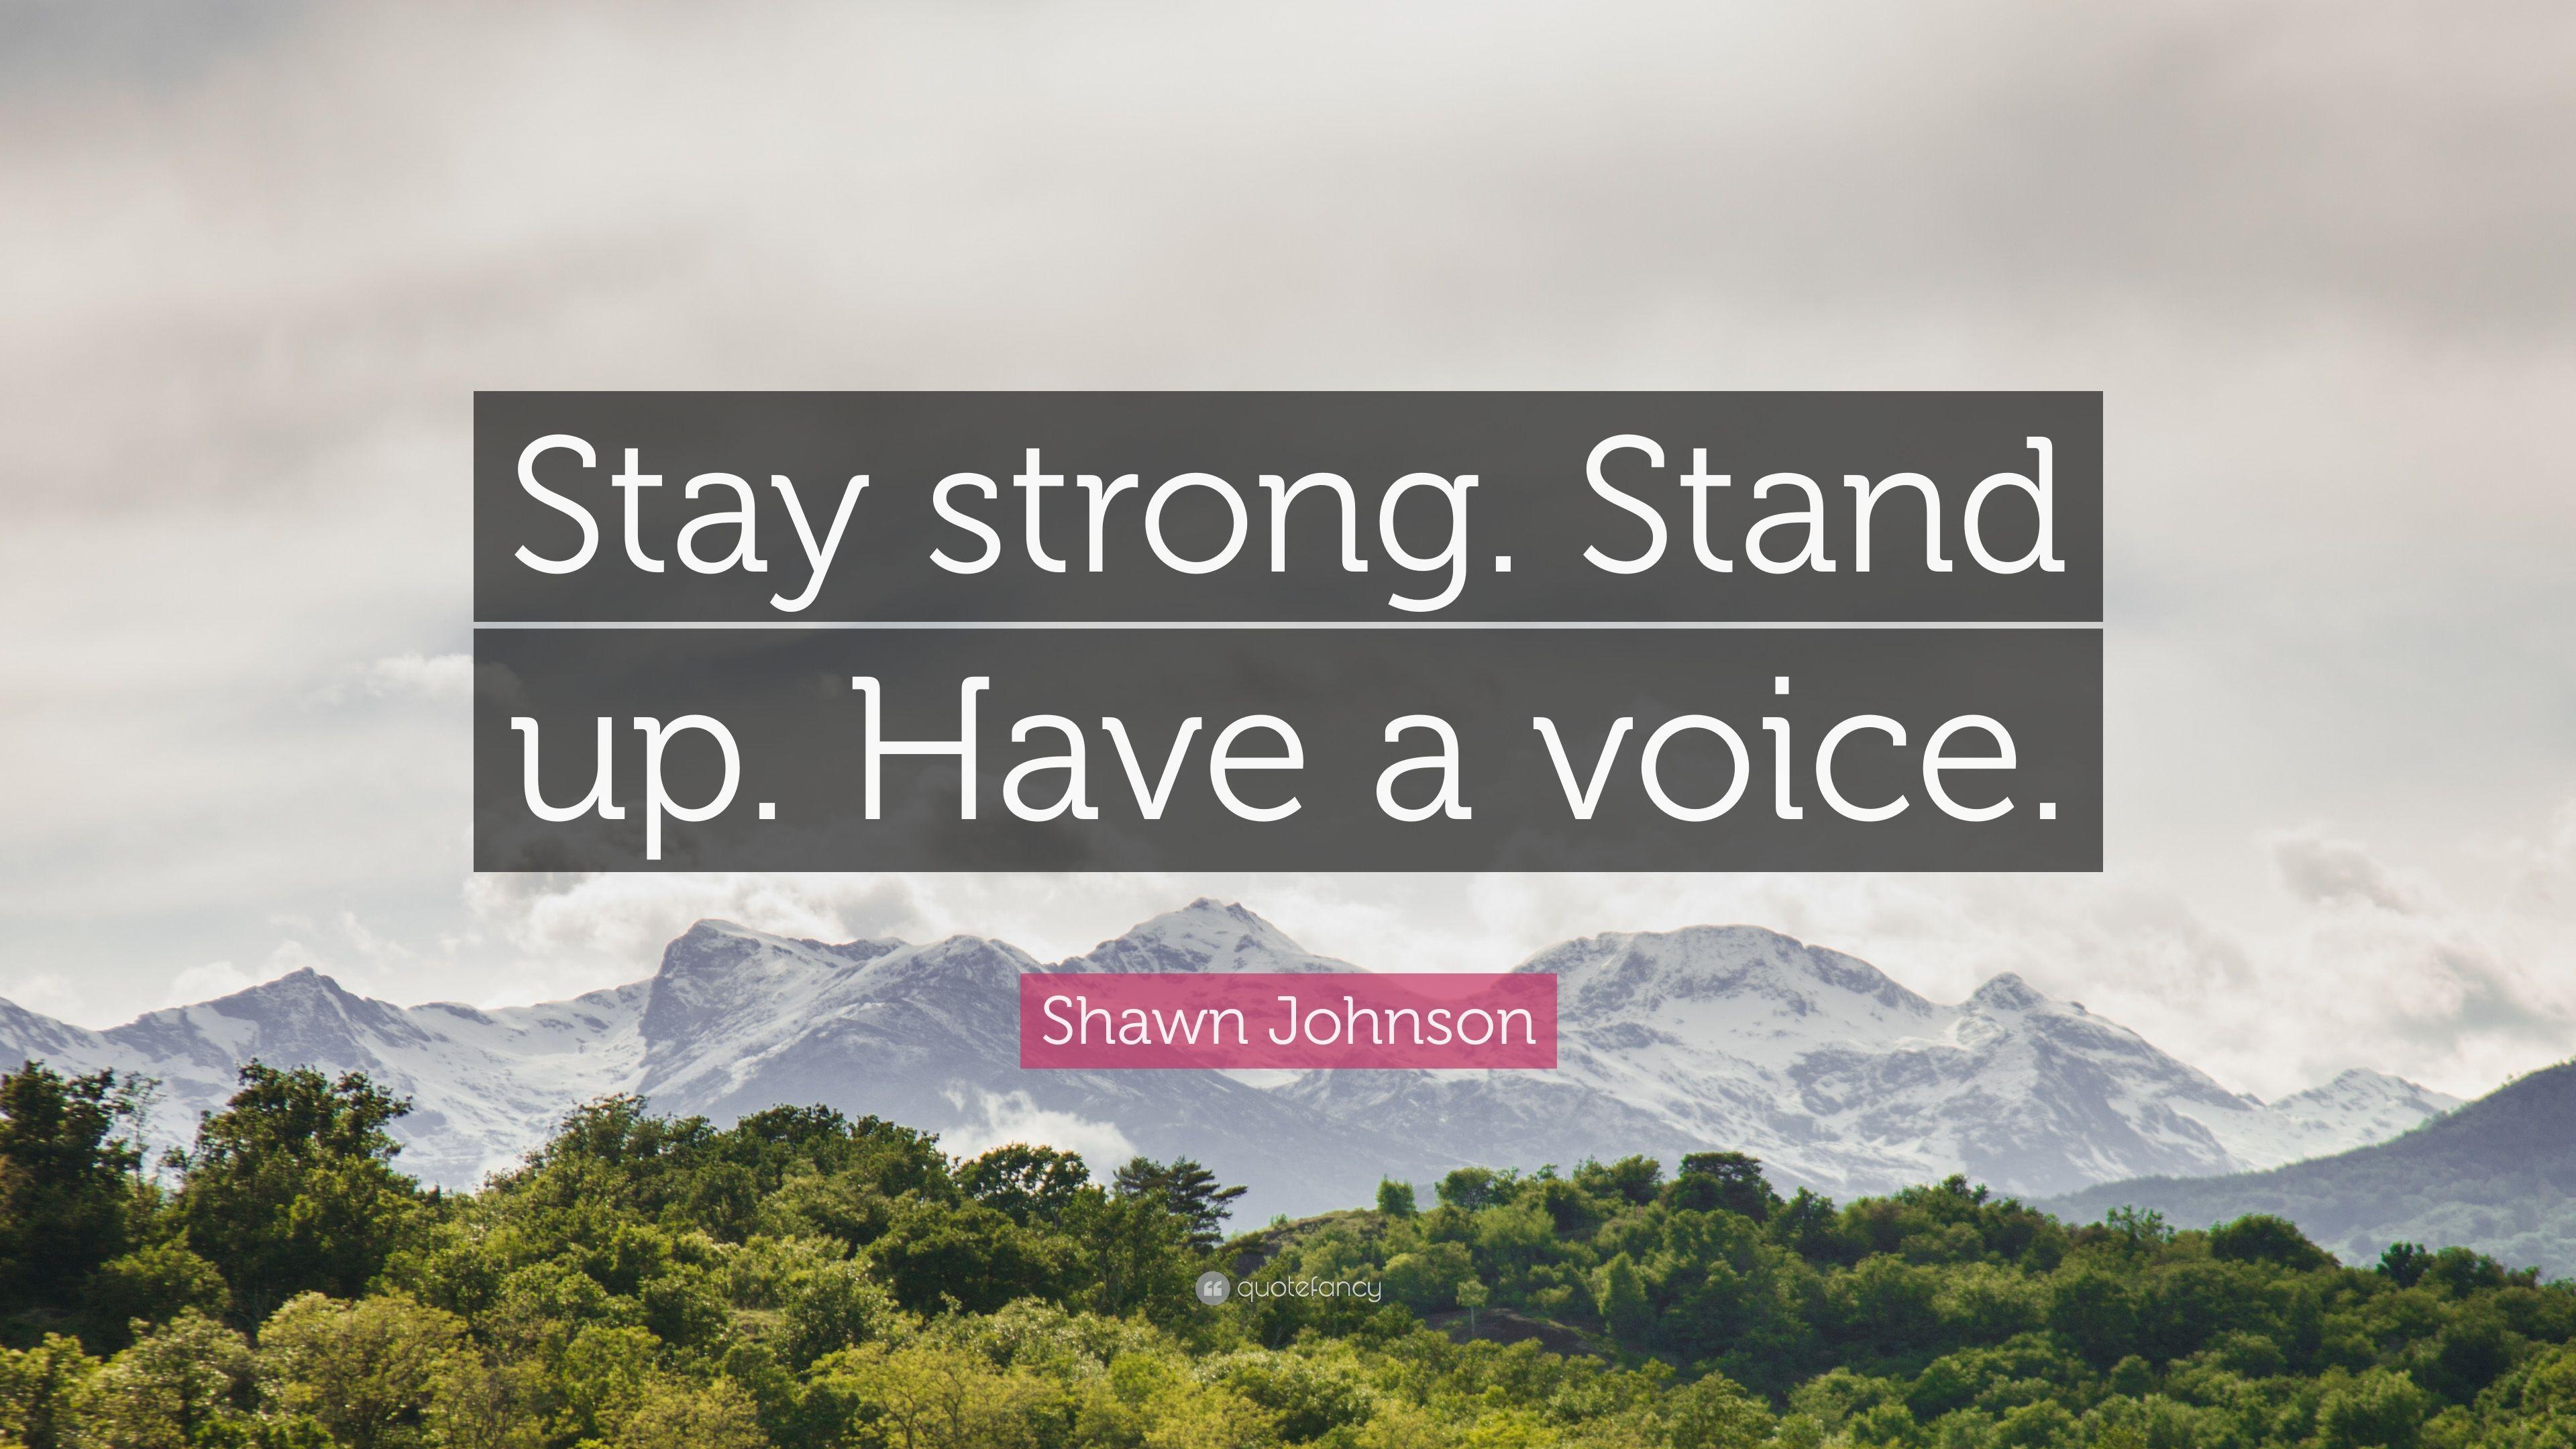 Shawn Johnson Quote: “Stay strong. Stand up. Have a voice.” (10 wallpaper)